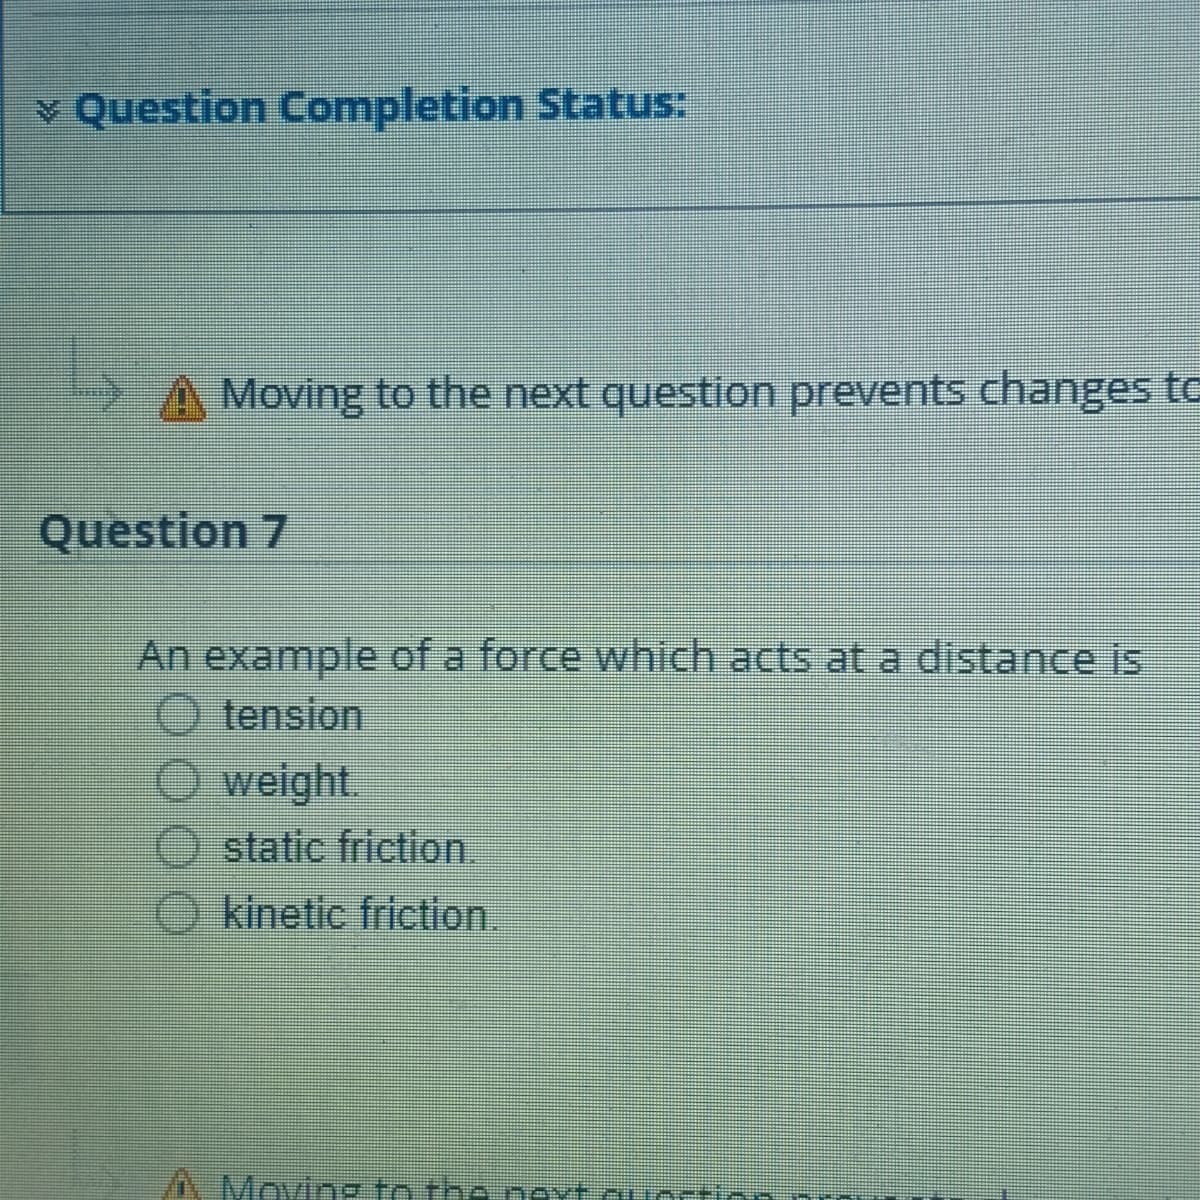 v Question Completion Status:
A Moving to the next question prevents changes to
Question 7
An example of a force which acts at a distance is
O tension
O weight.
static friction.
kinetic friction.
/ Moving to the next.cuortio
